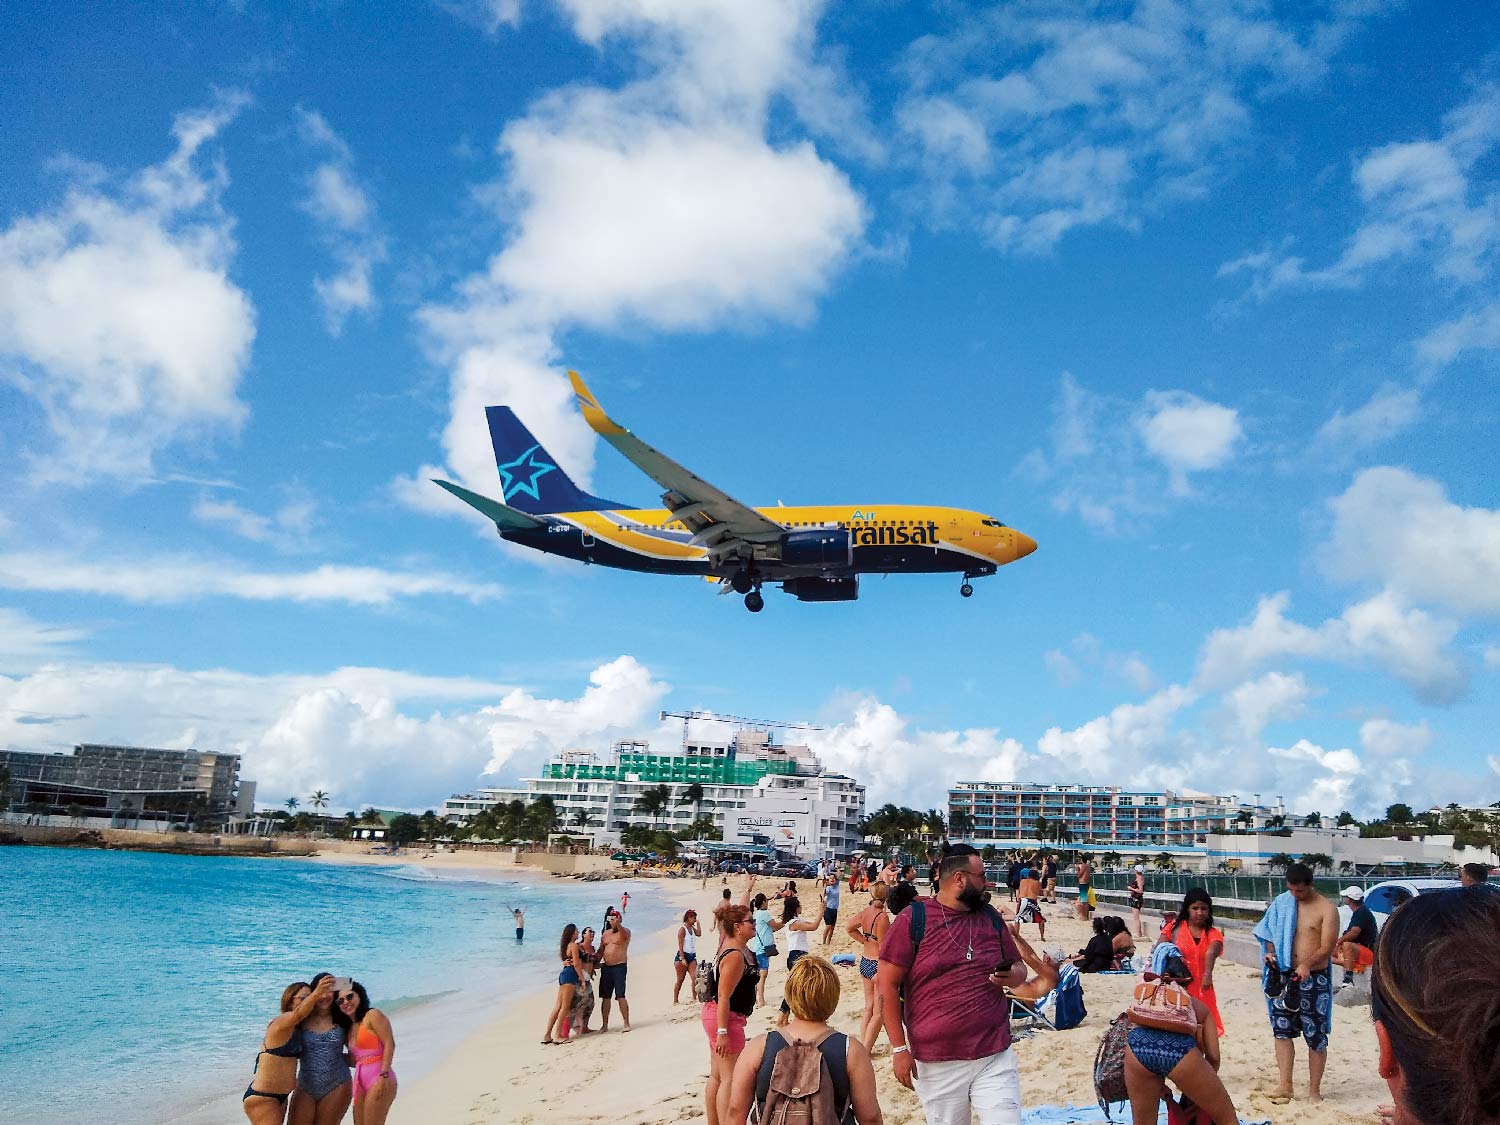 Taking Wing: Airports of the Caribbean